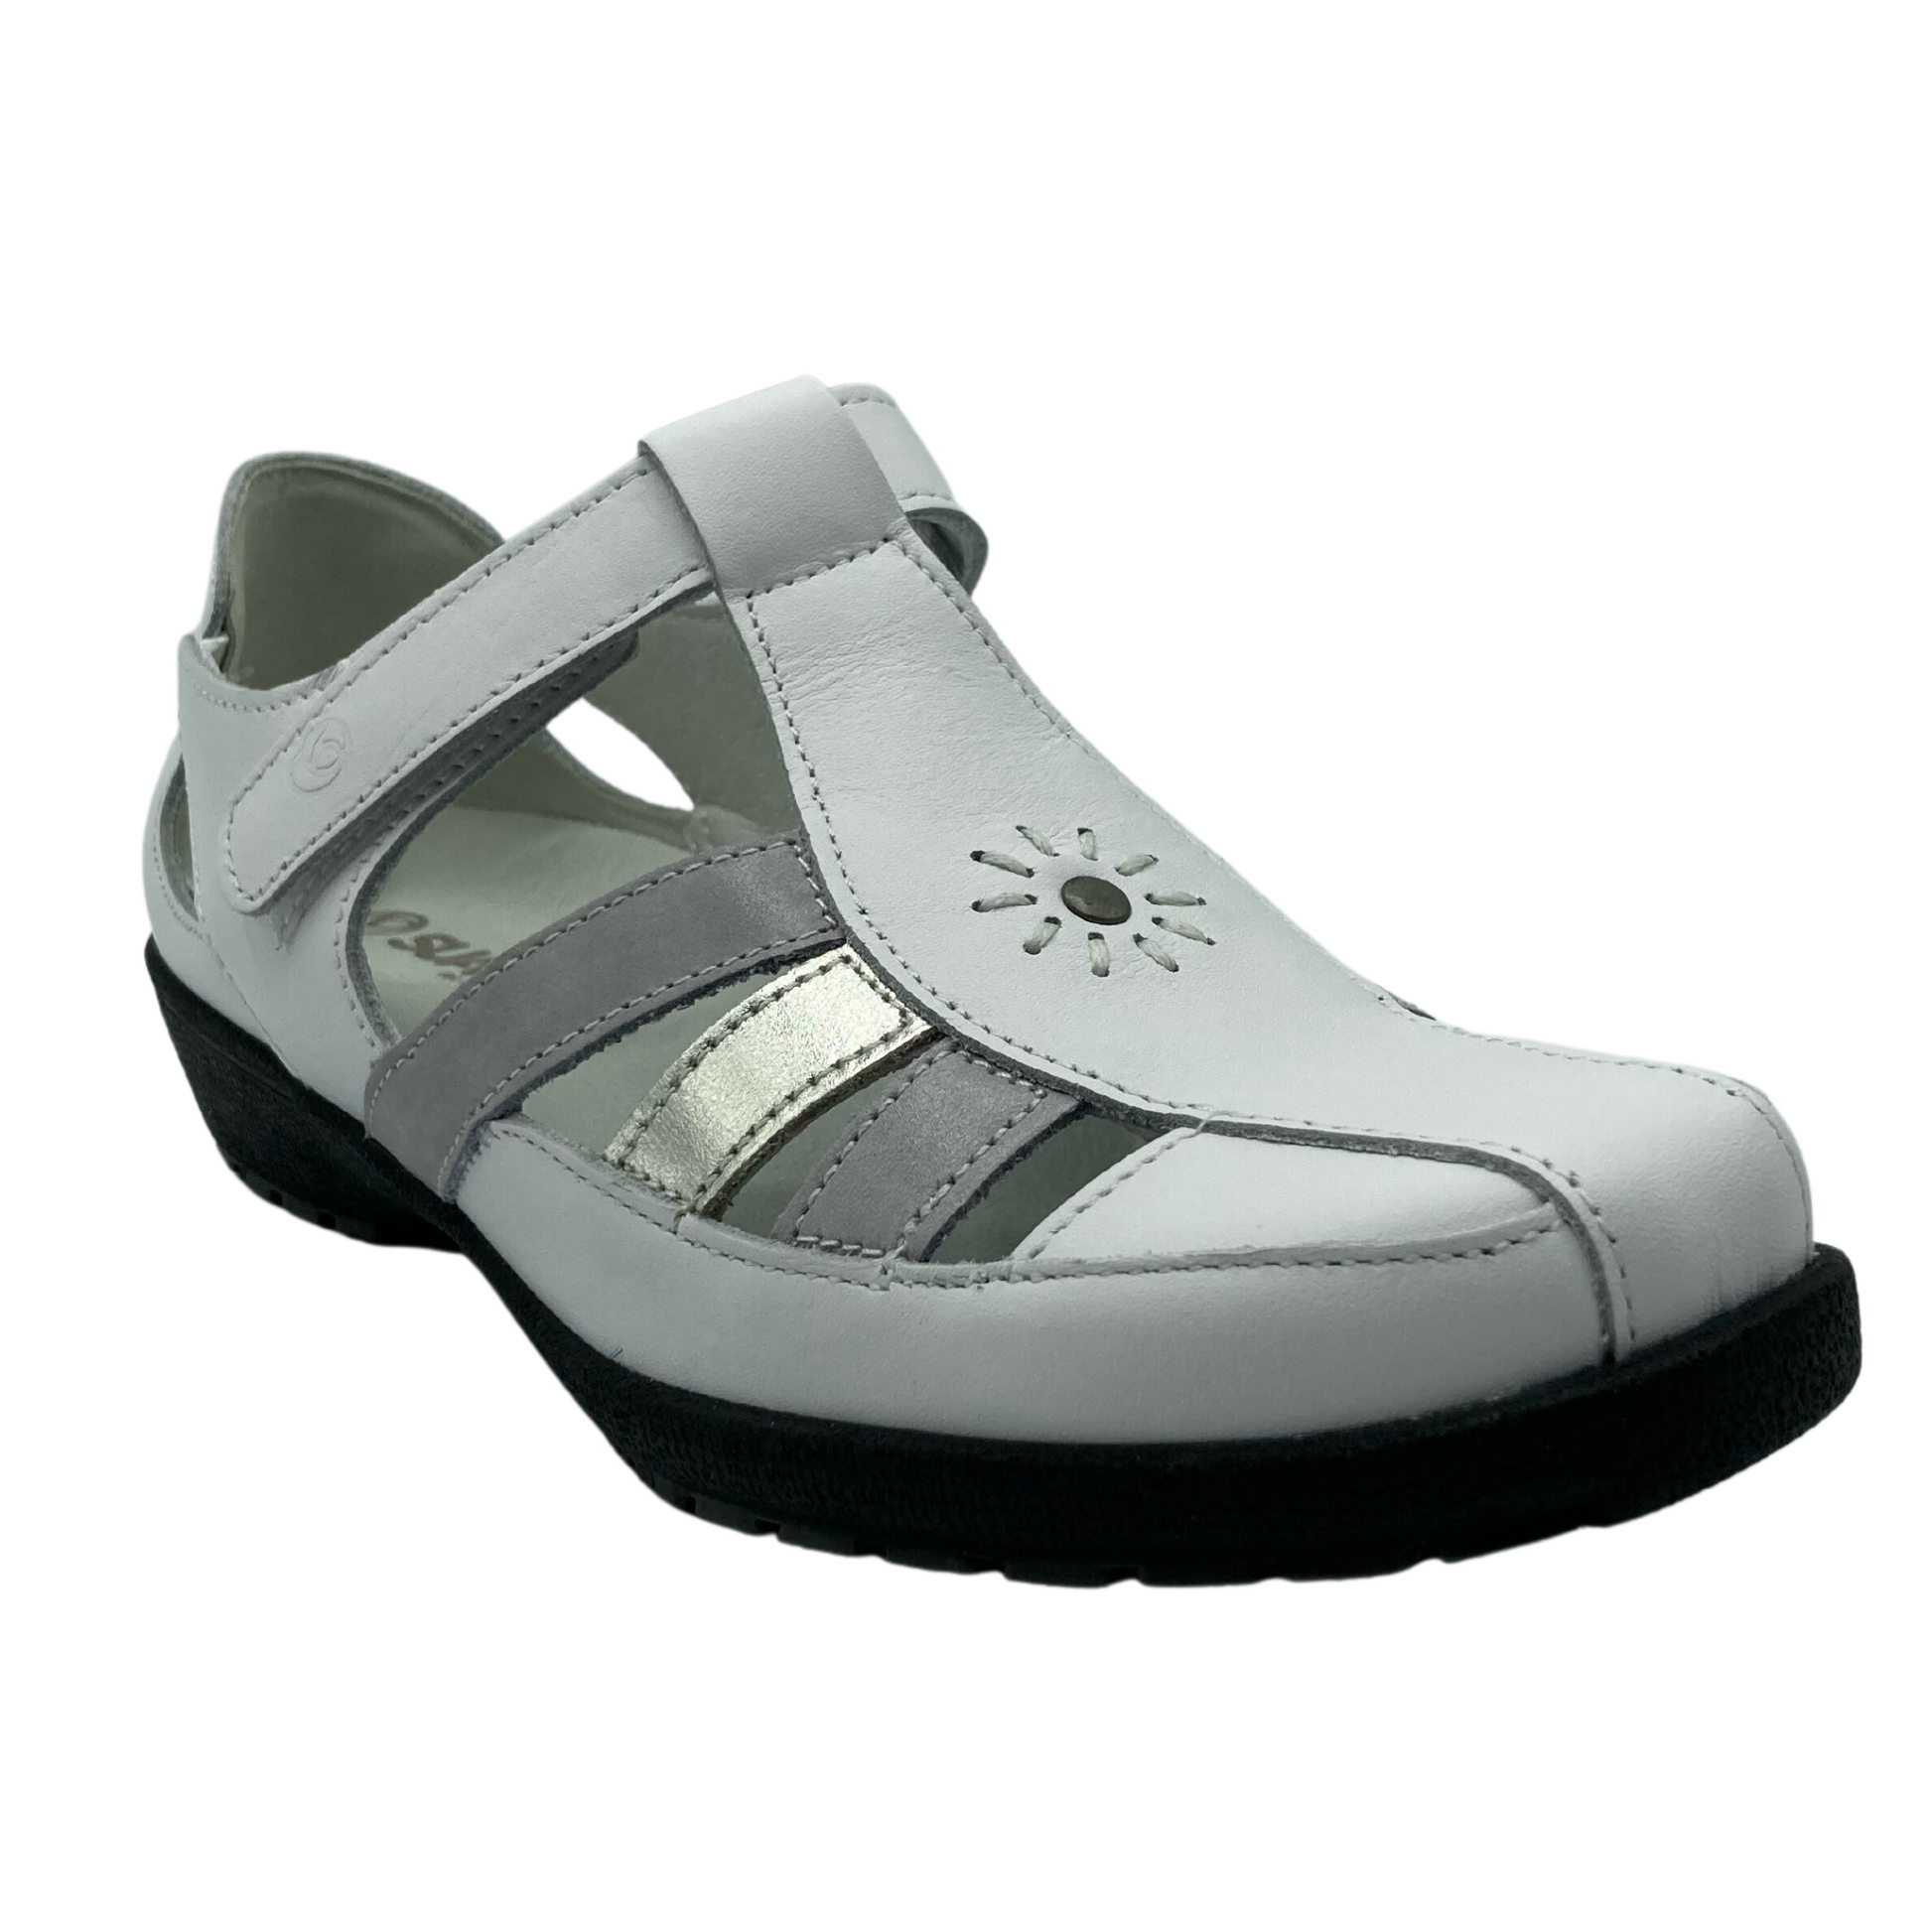 Angled view of sandal shoe with embroidered sun design on the top. White leather upper with black rubber sole.